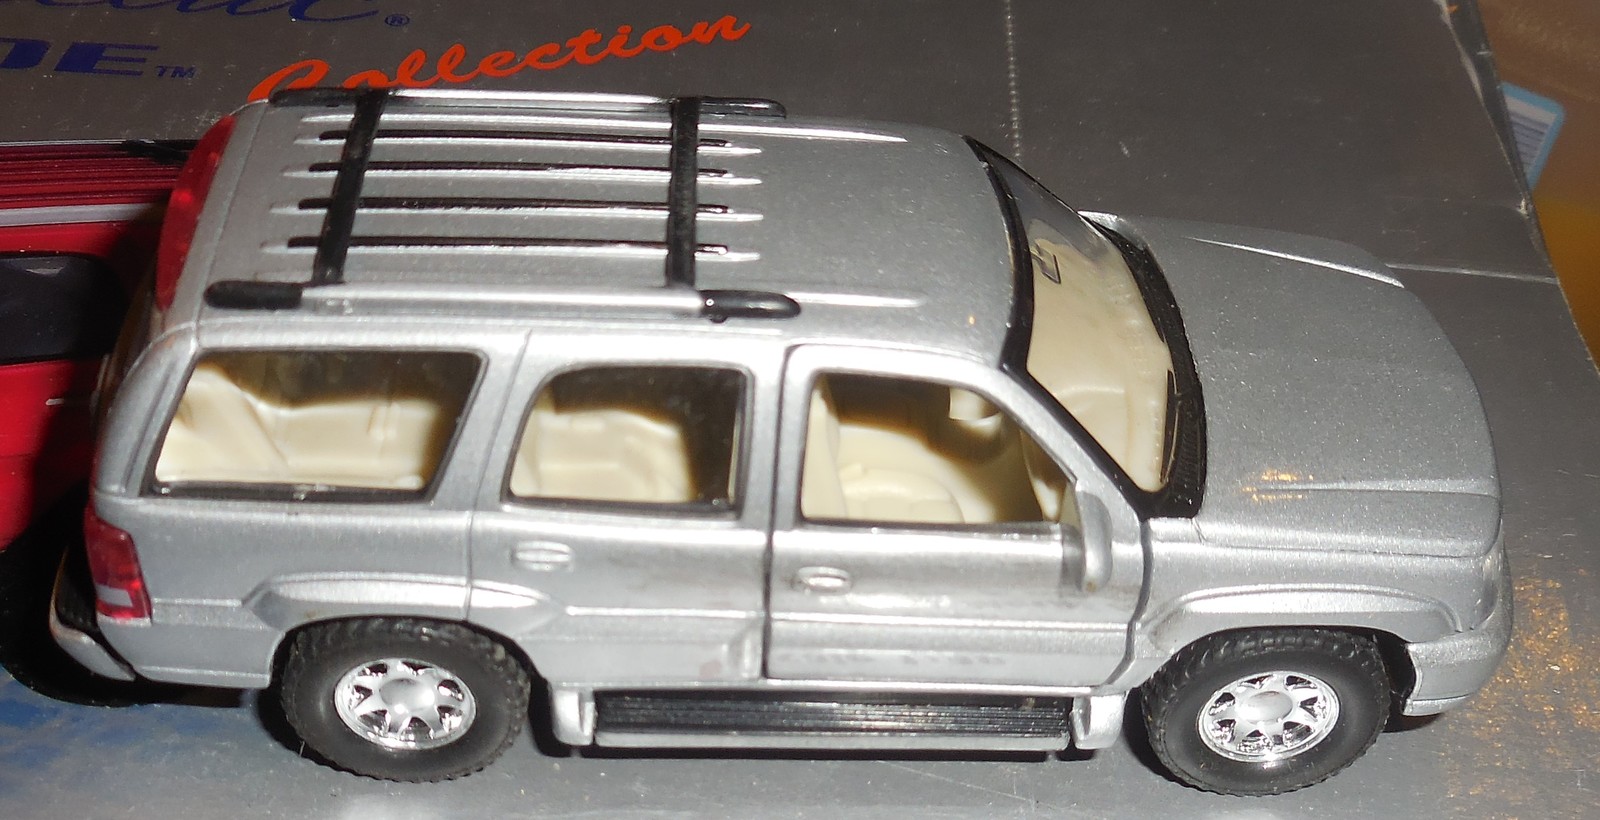 Welly 2002 Cadillac Escalade 1/38 Scale Car w/Opening Doors Mint w/ No Box - $6.00